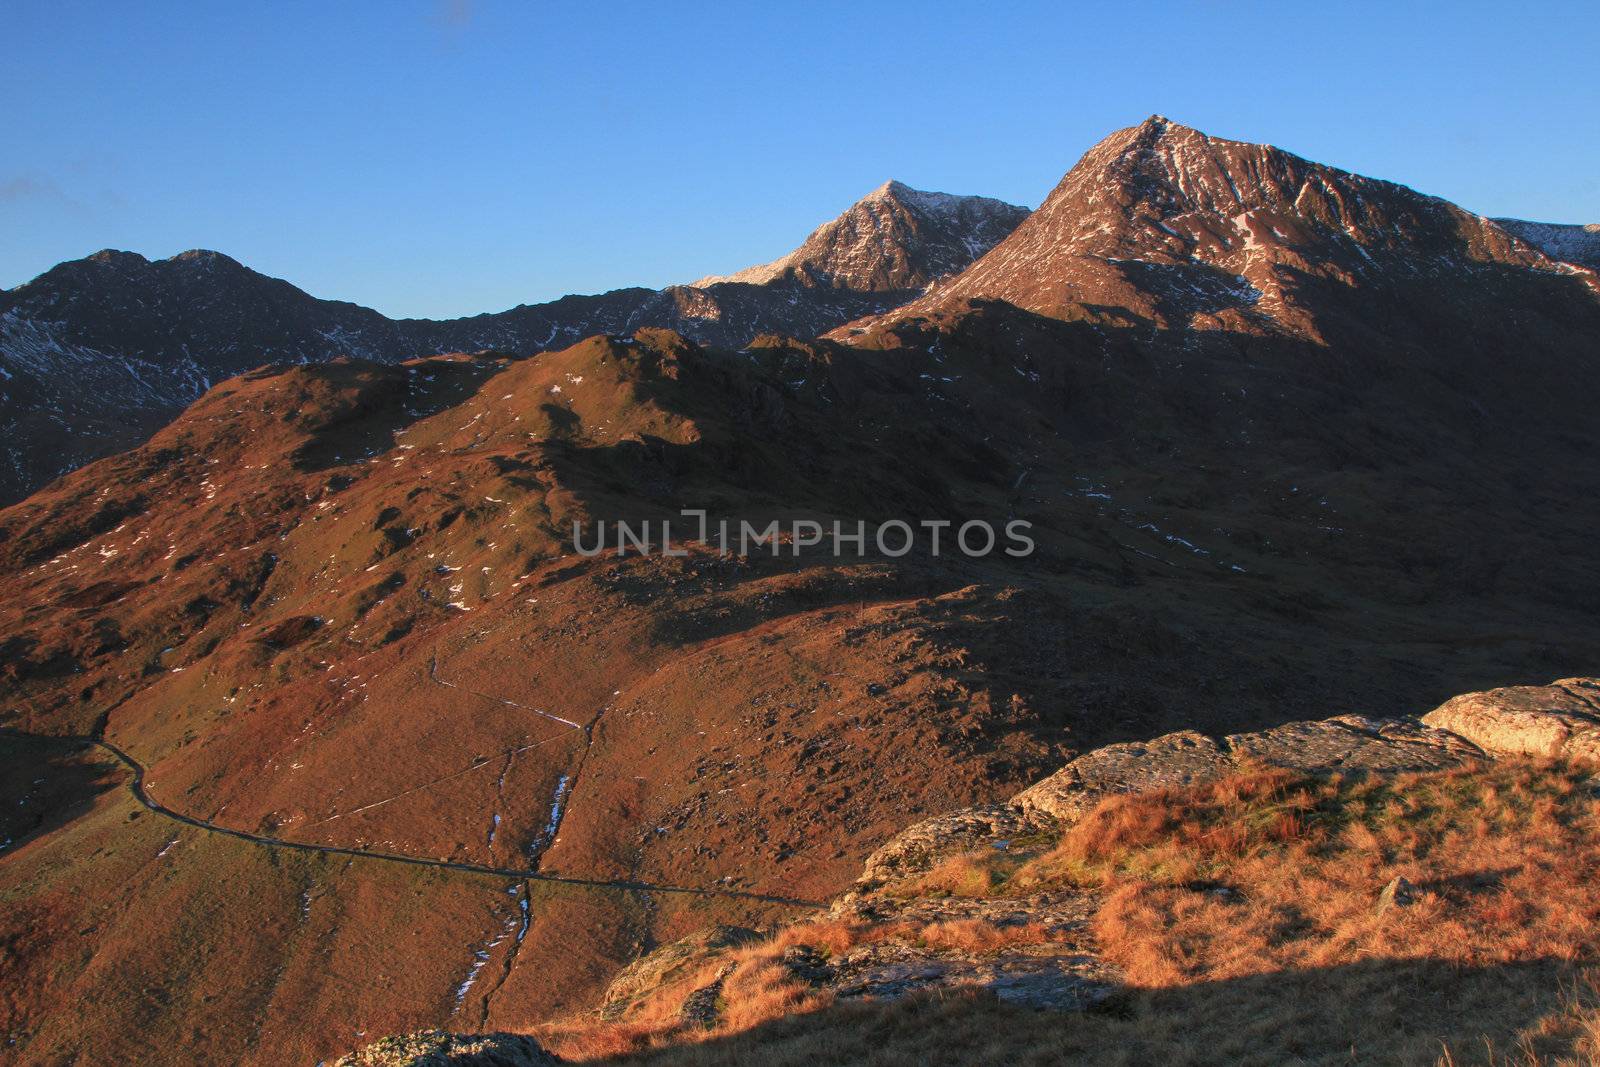 The East side of the Snowdon Massif in the dawn light with the miners track visible and the peaks of Crib Goch and Snowdon against a blue sky, Snowdonia National Park, Wales, UK.